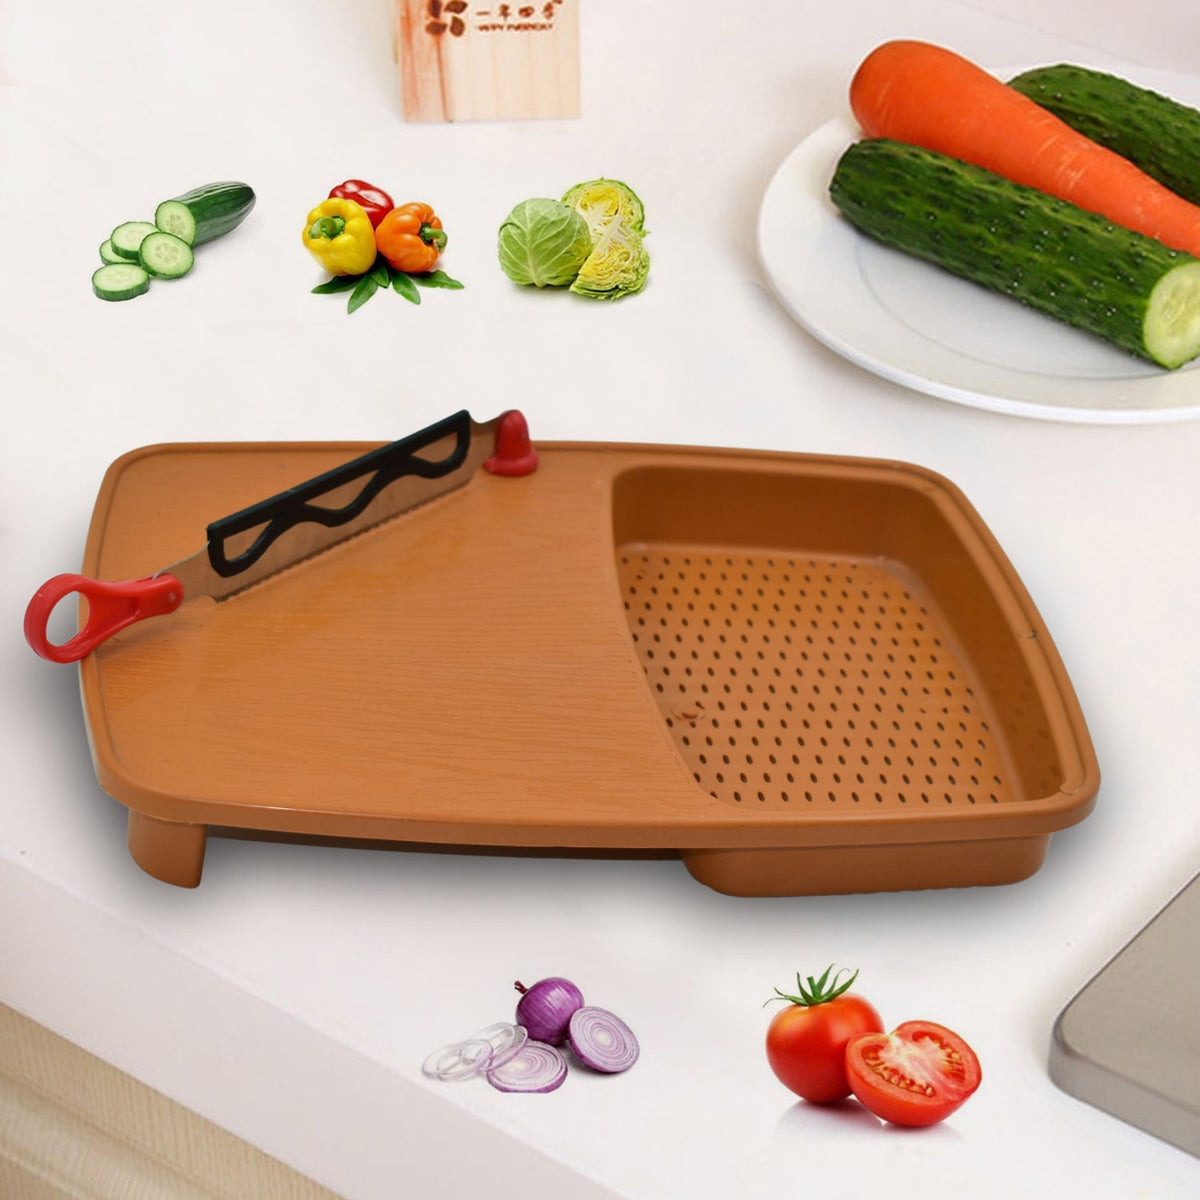 Dropship 4 Sides Cheese Melon Cucumber Vegetables Box Grater Food